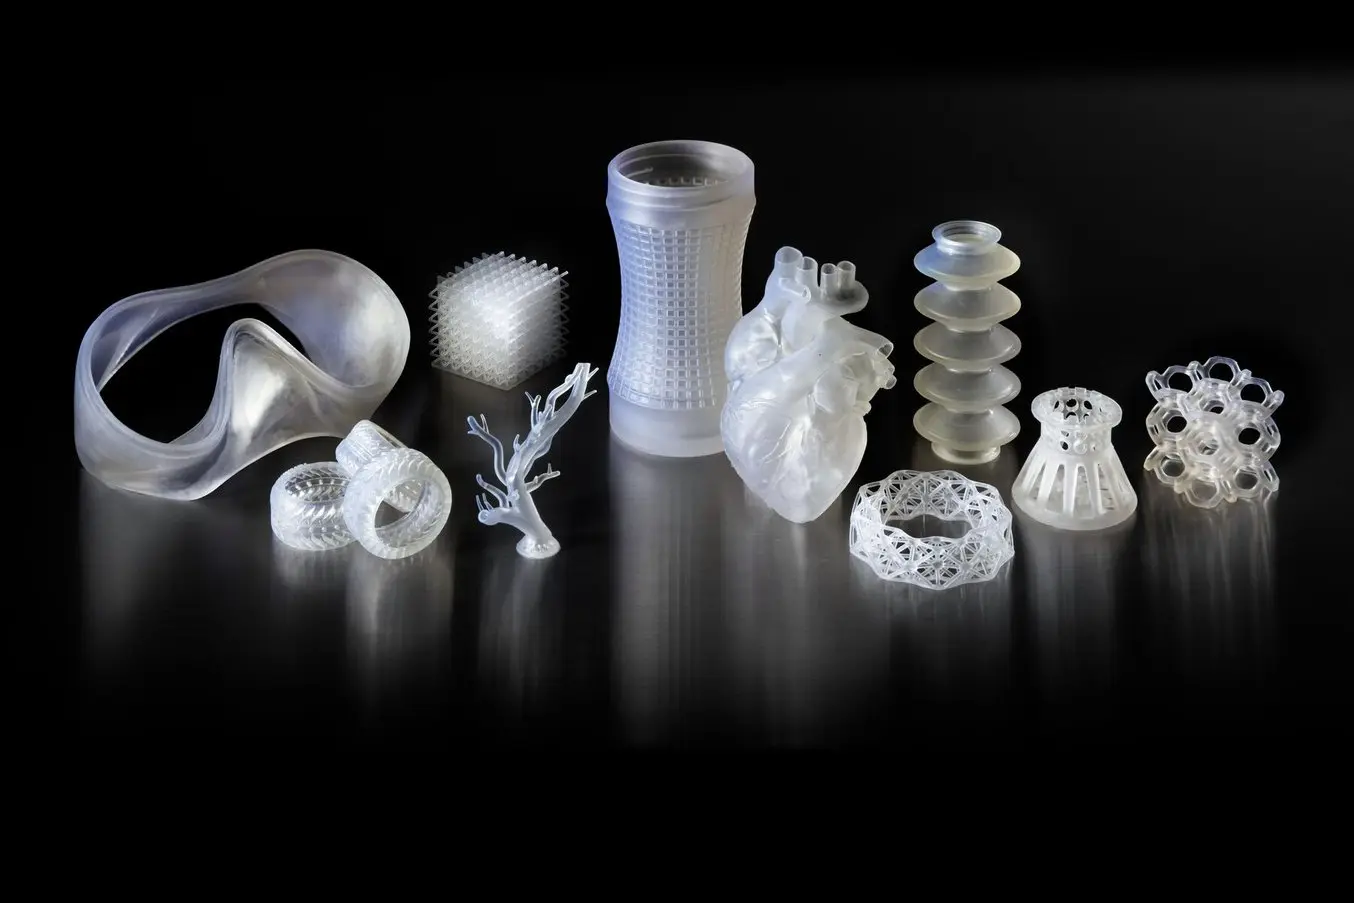 SLA 3D printing offers multiple alternatives to silicone 3D printing